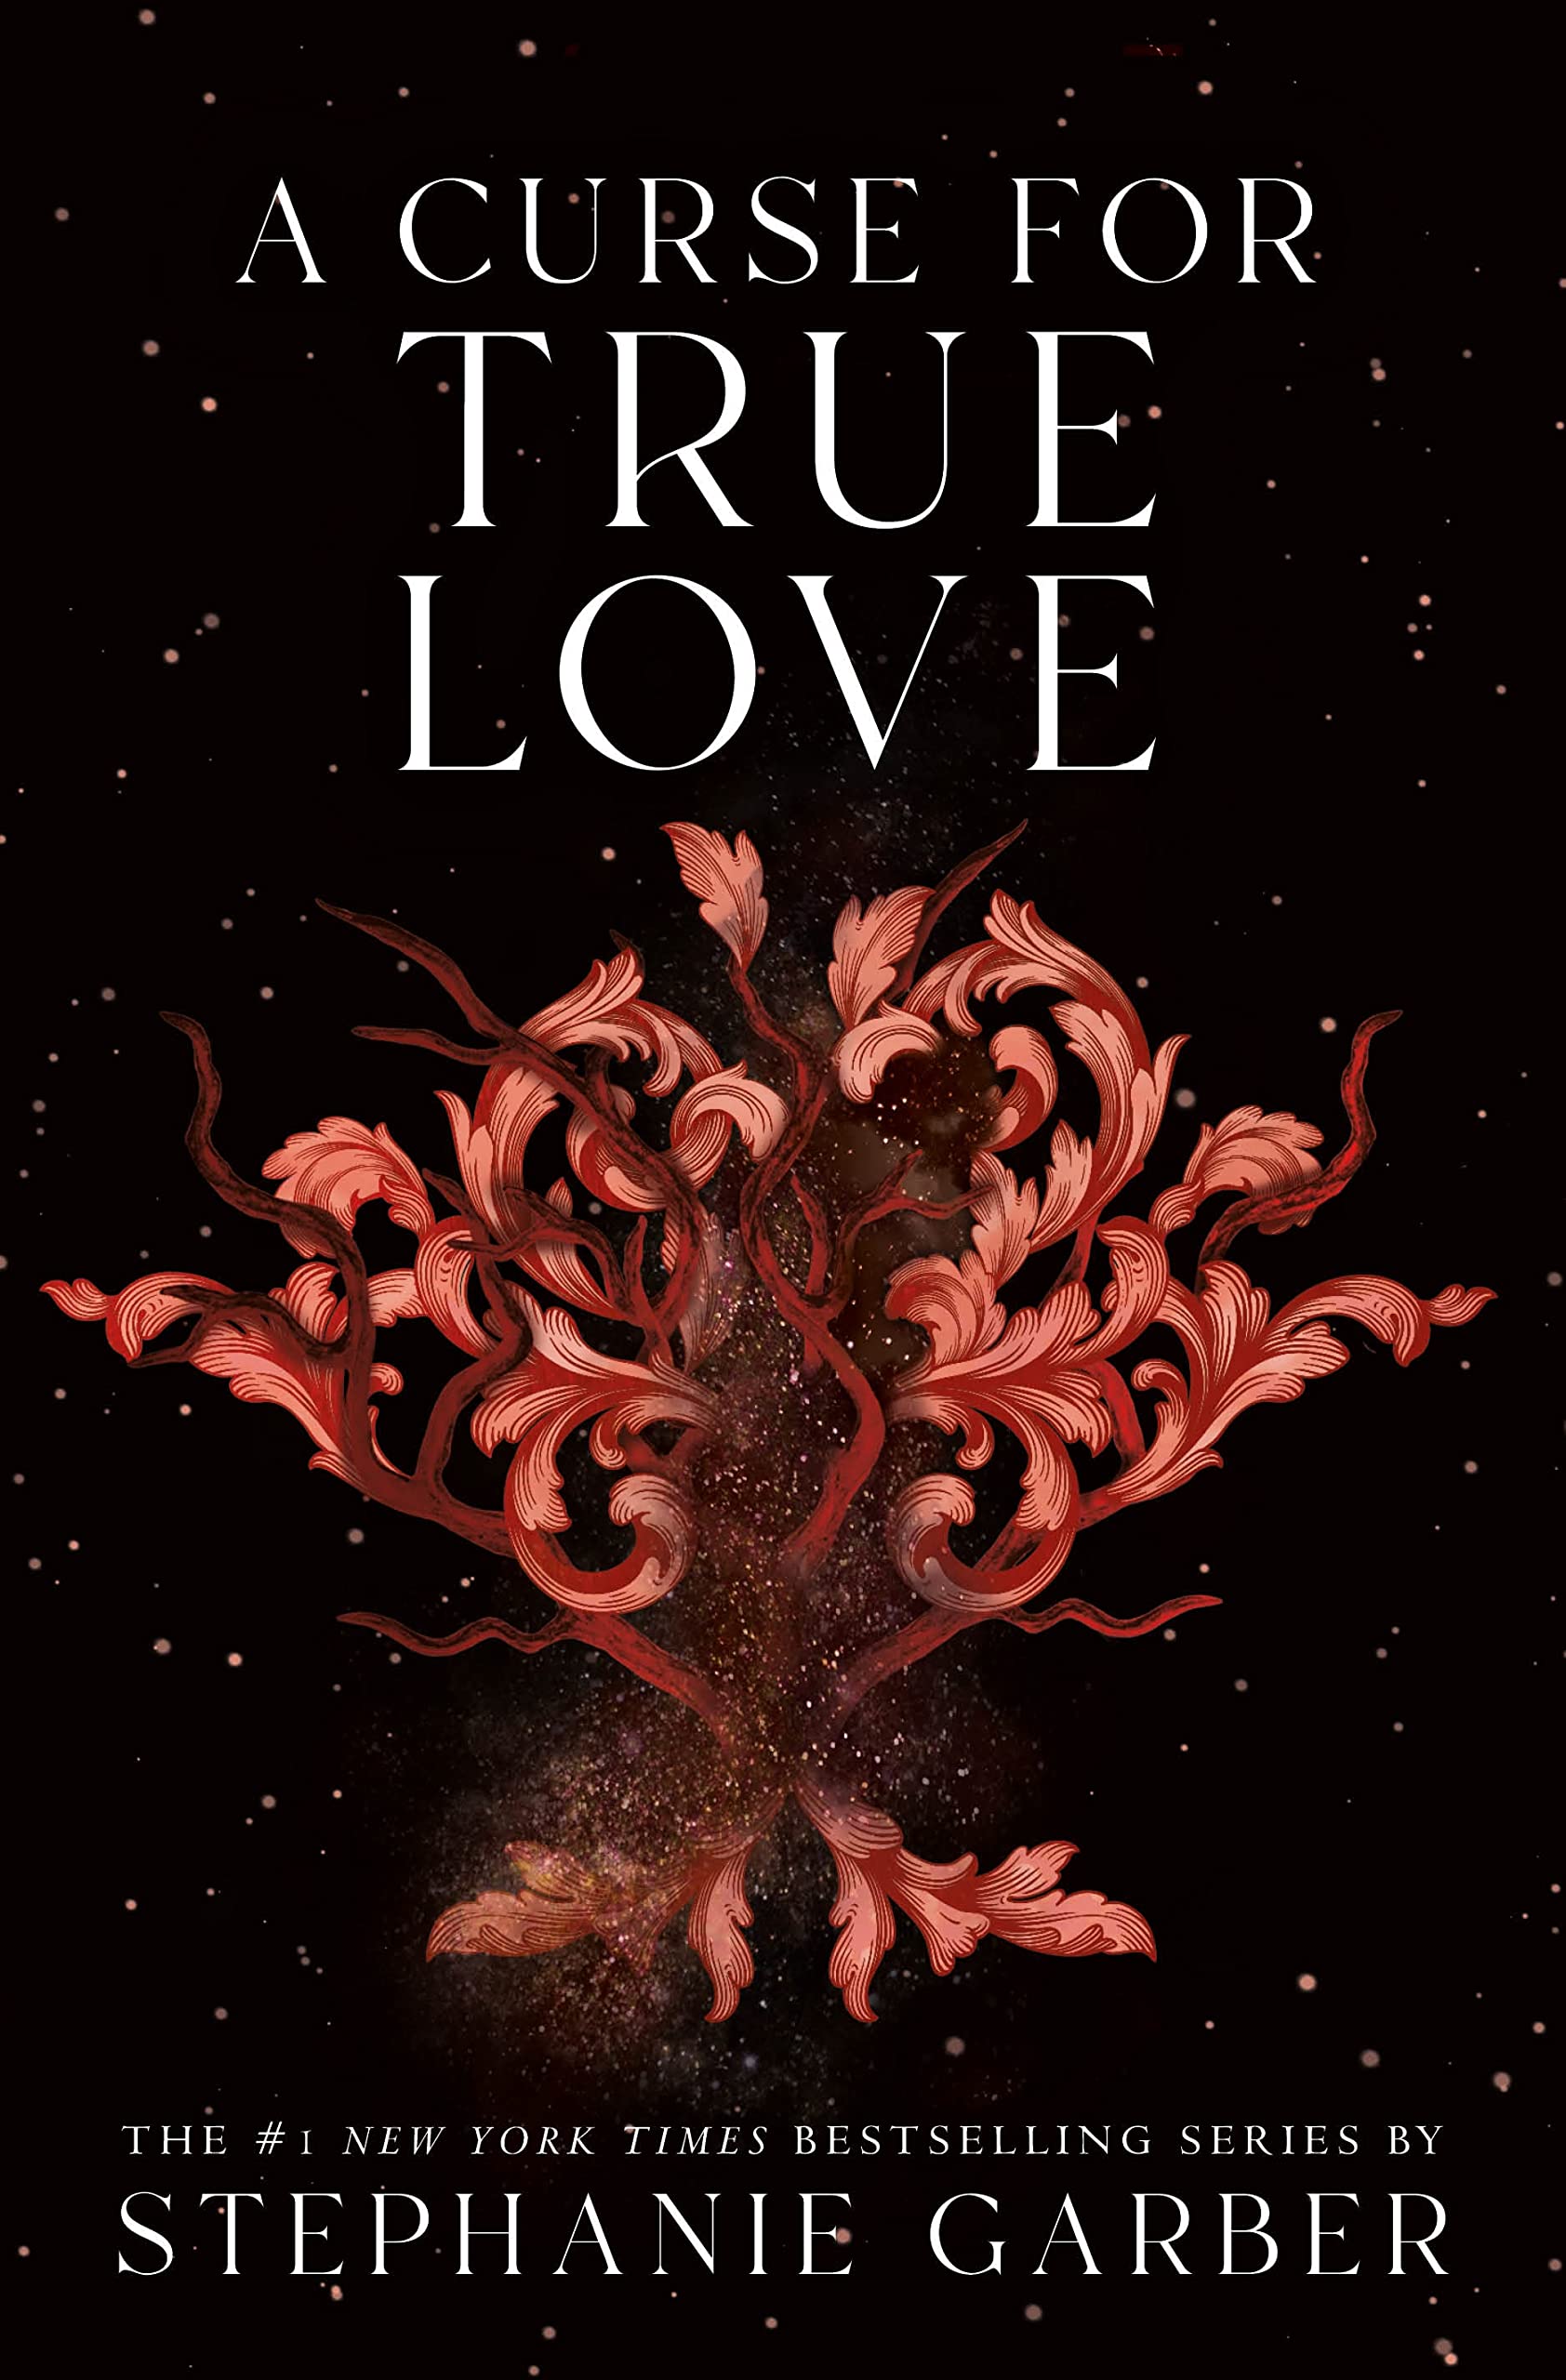 A Curse for True Love (Once Upon a Broken Heart, #3)